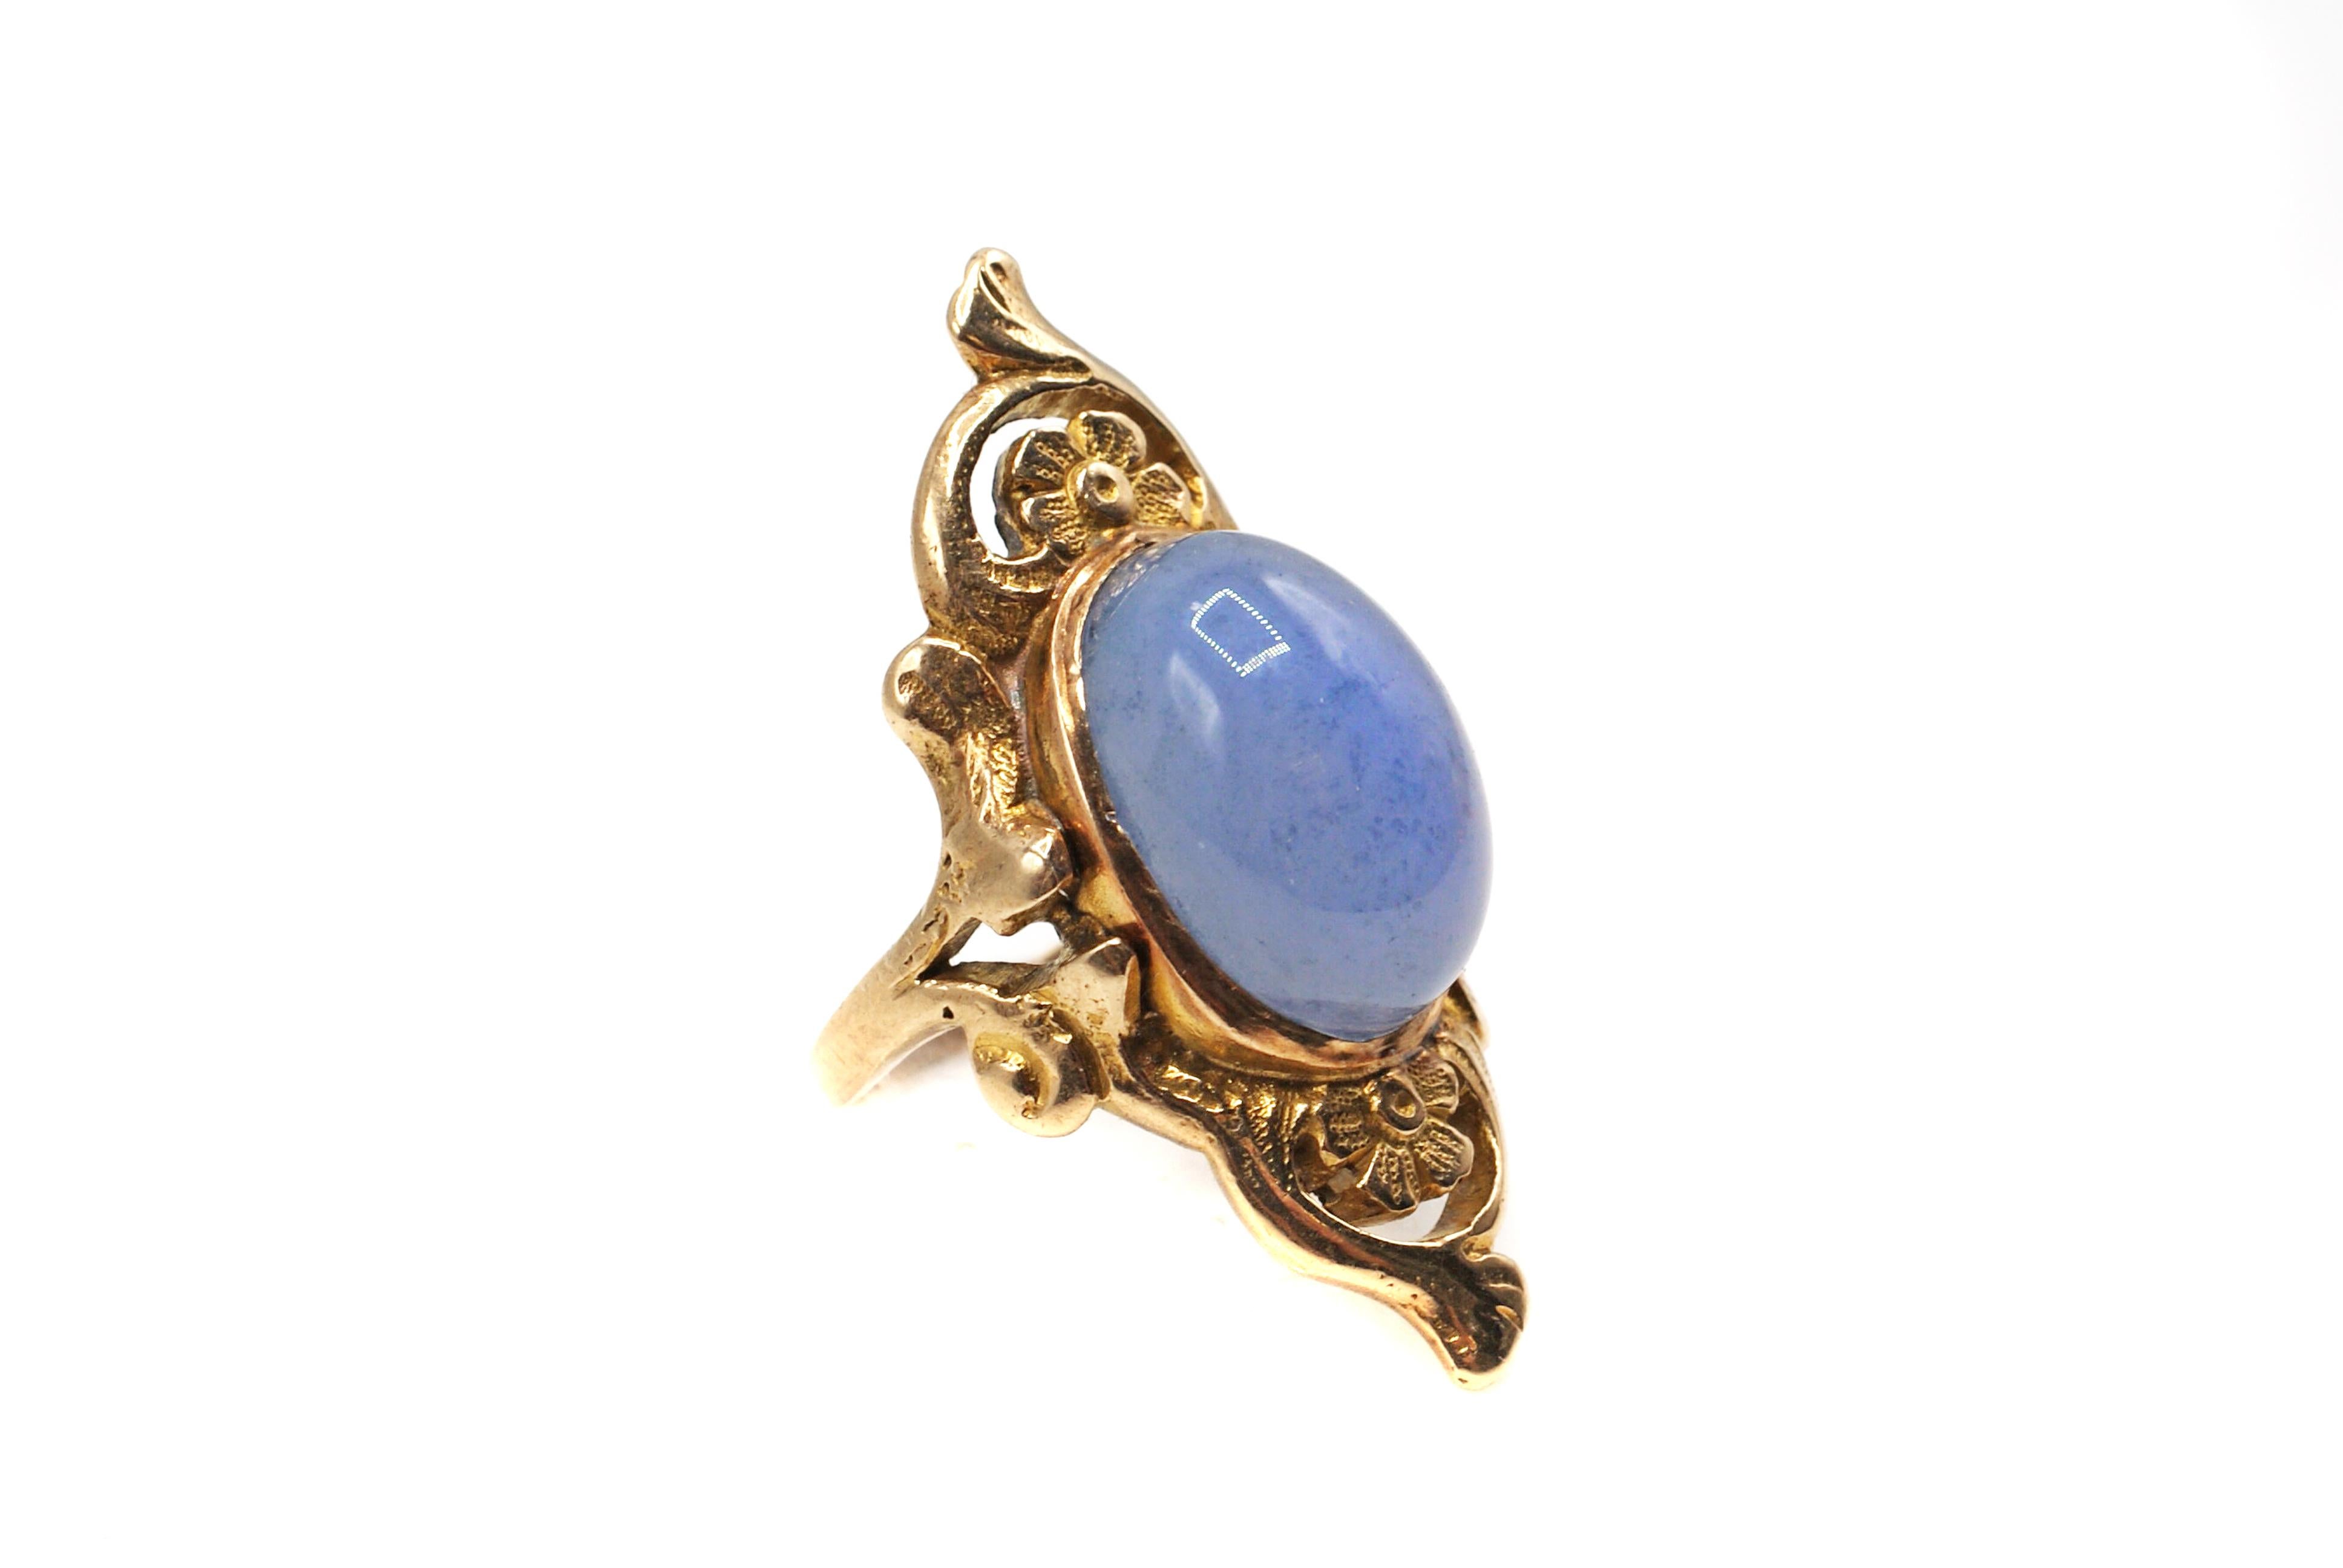 Beautifully designed and handcrafted Art Nouveau ring from ca. 1890, centrally set with Chalcedony cabochon. The gemstone is bezel set and embellished by a wonderful floral design typical for this era. The inside of the shank has a makers-mark which